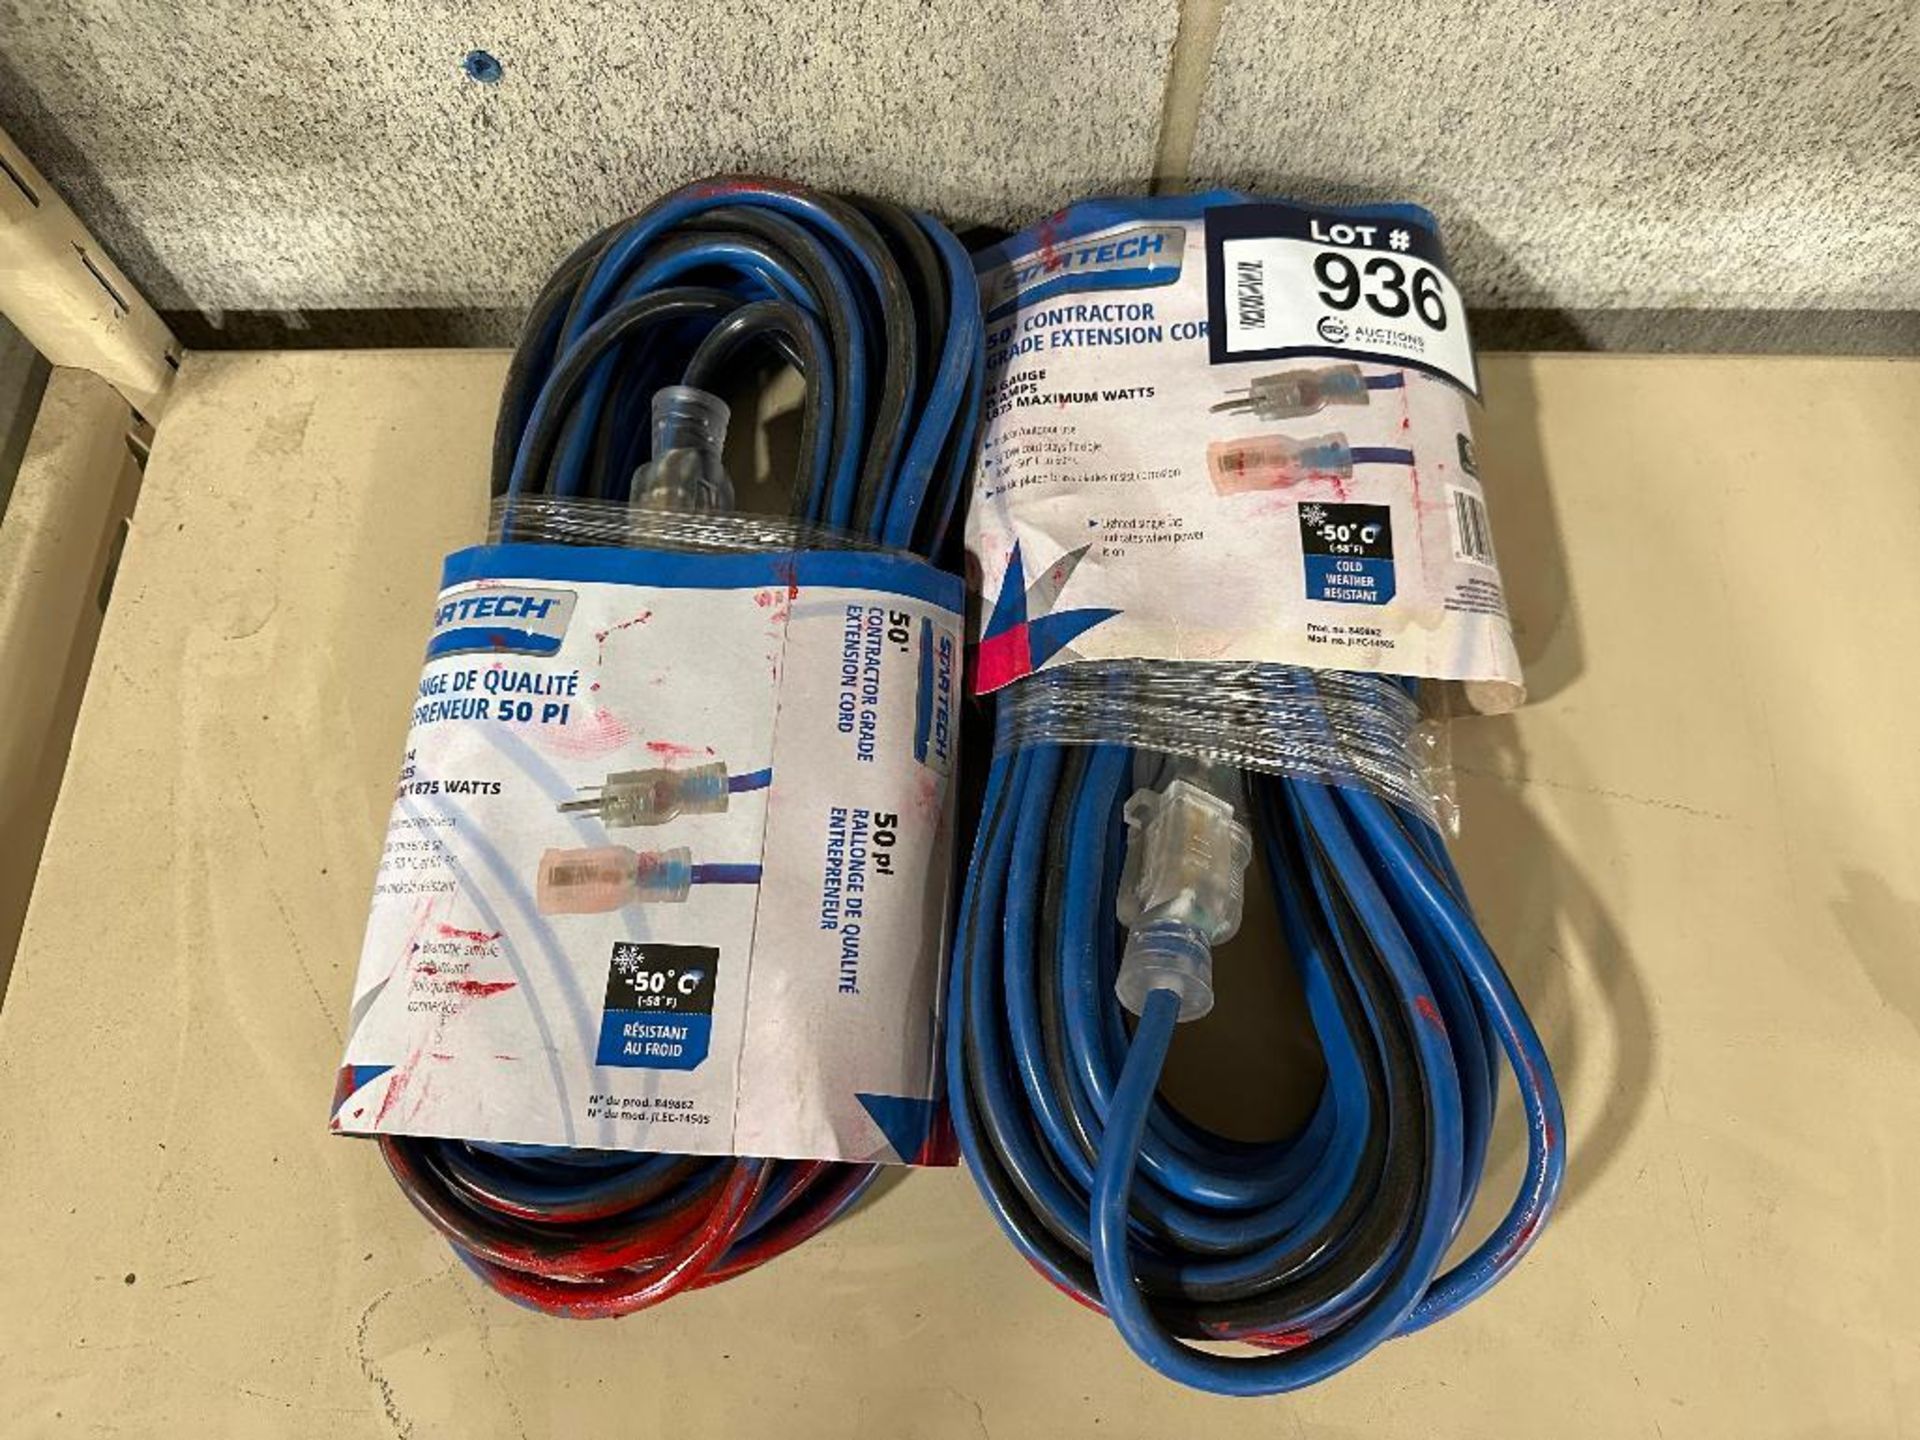 Lot of (2) Startech 50' Contractor Grade Extension Cords - Image 3 of 3